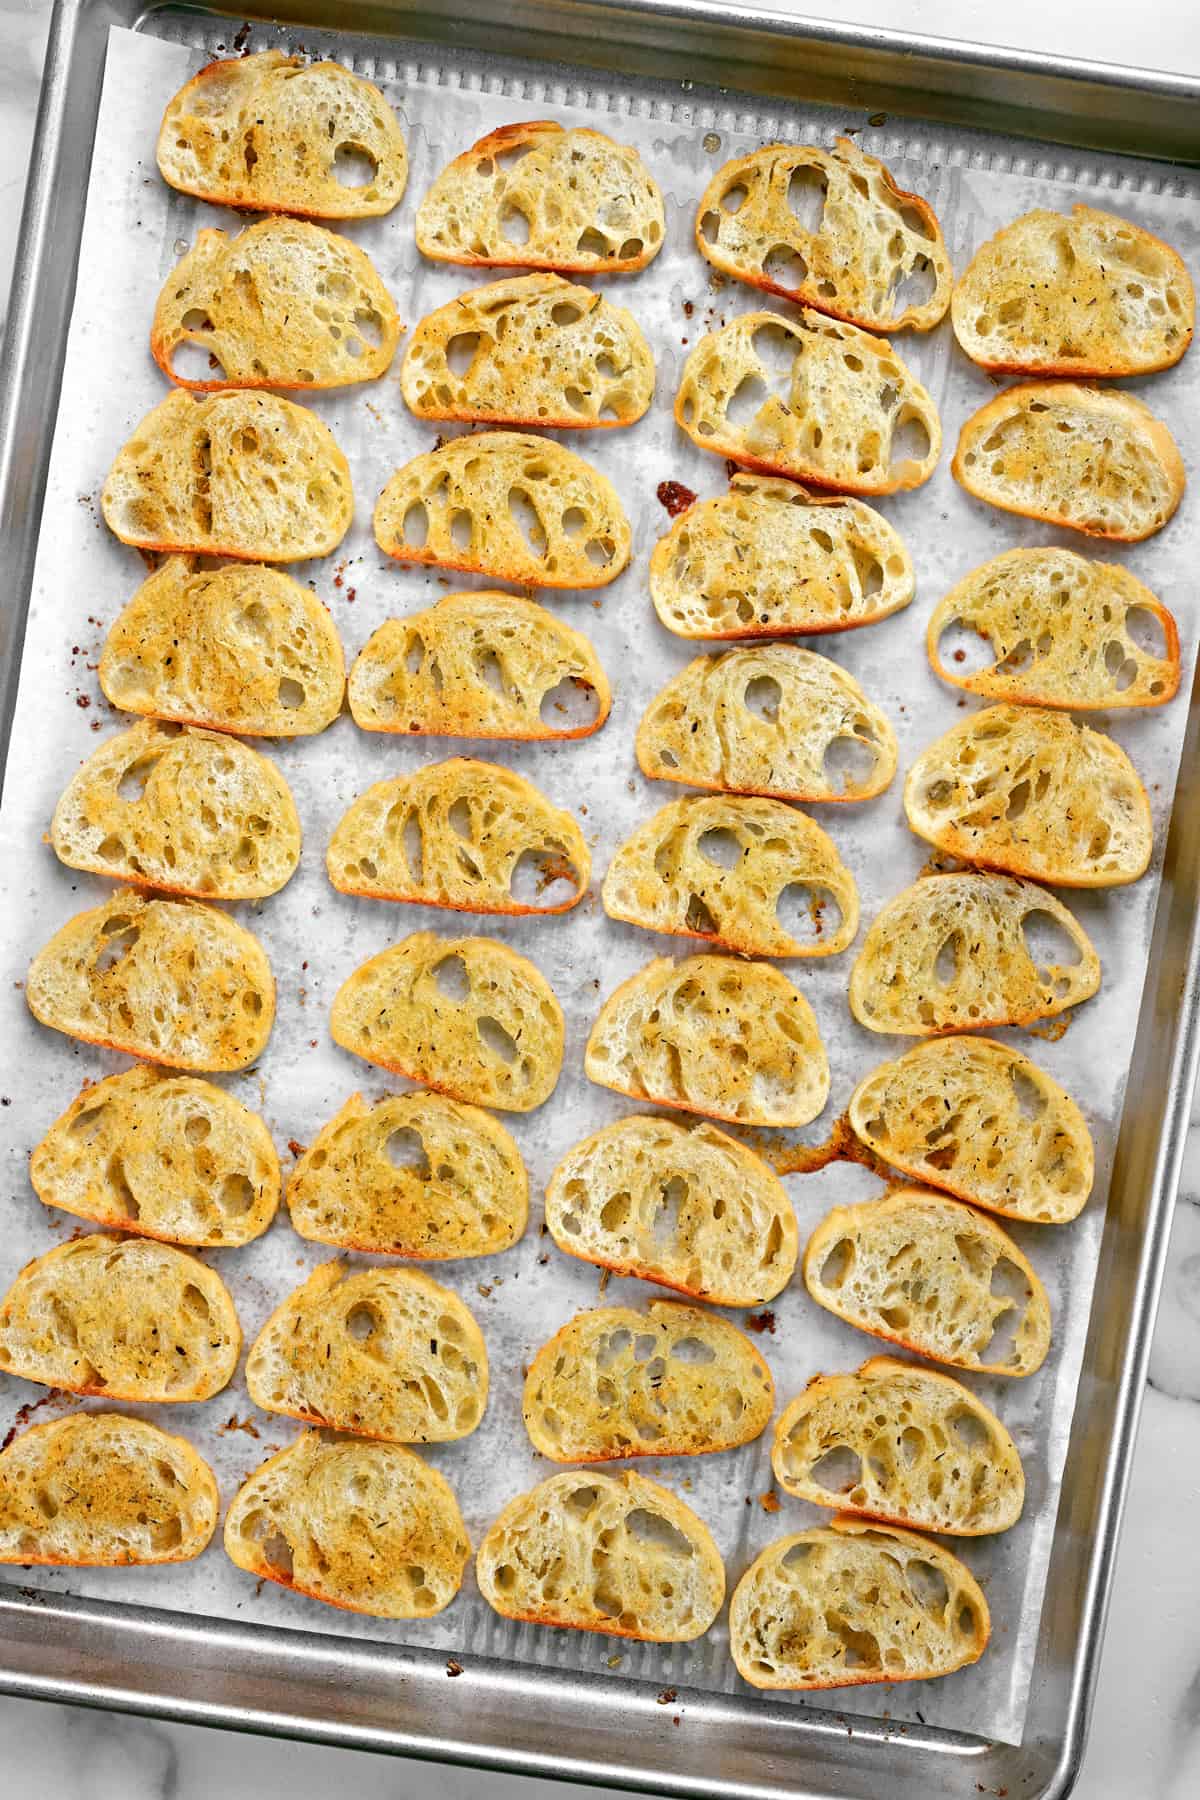 thirty-six slices of crostini bread on a baking pan.